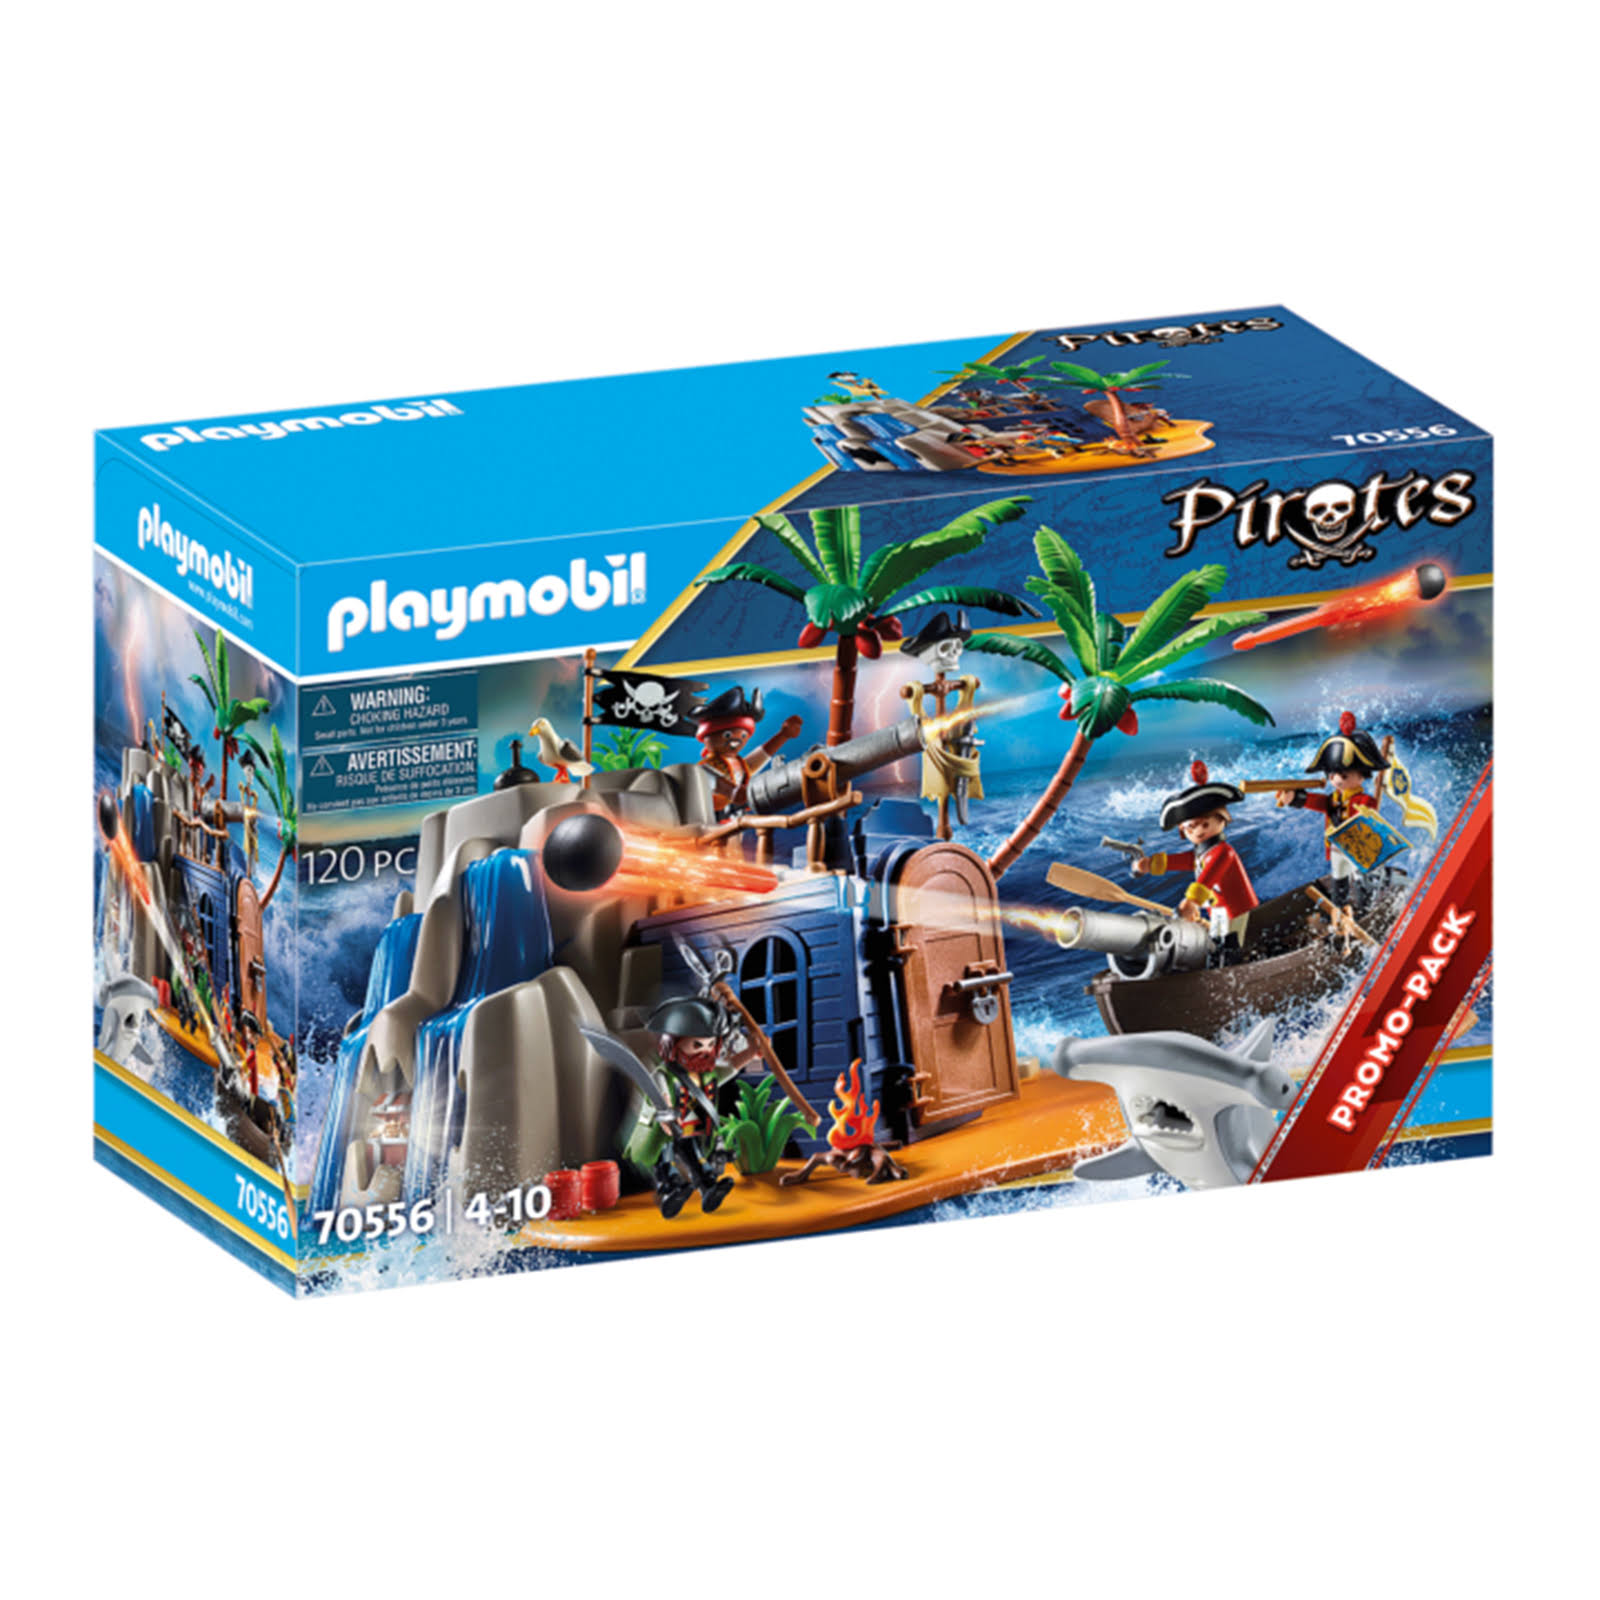 PLAYMOBIL Pirate Island Hideout Toy Set One-Size